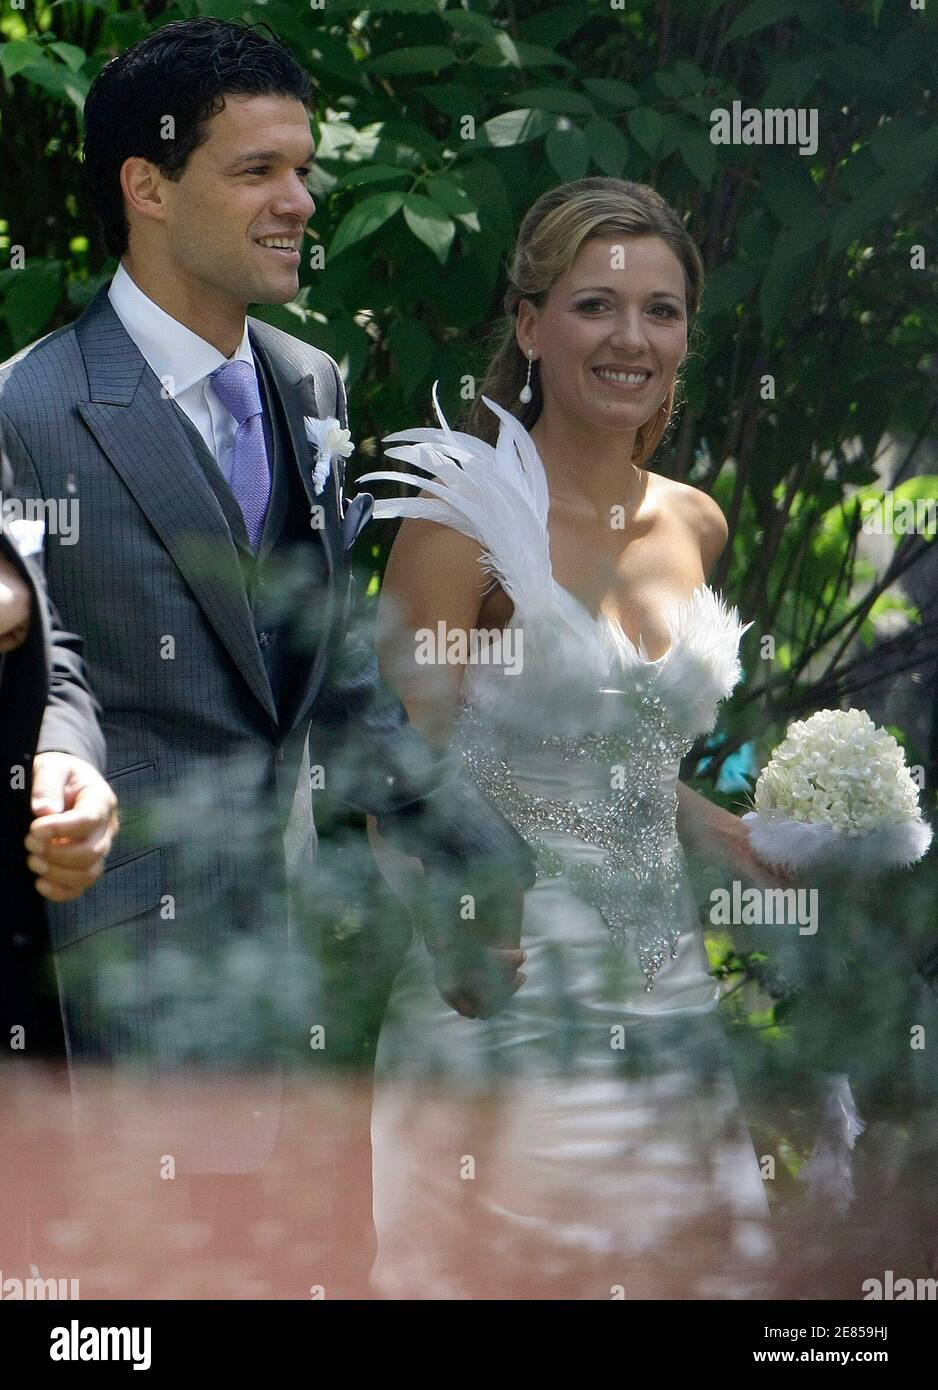 Wife Michael Ballack Simone Ballack High Resolution Stock Photography and  Images - Alamy